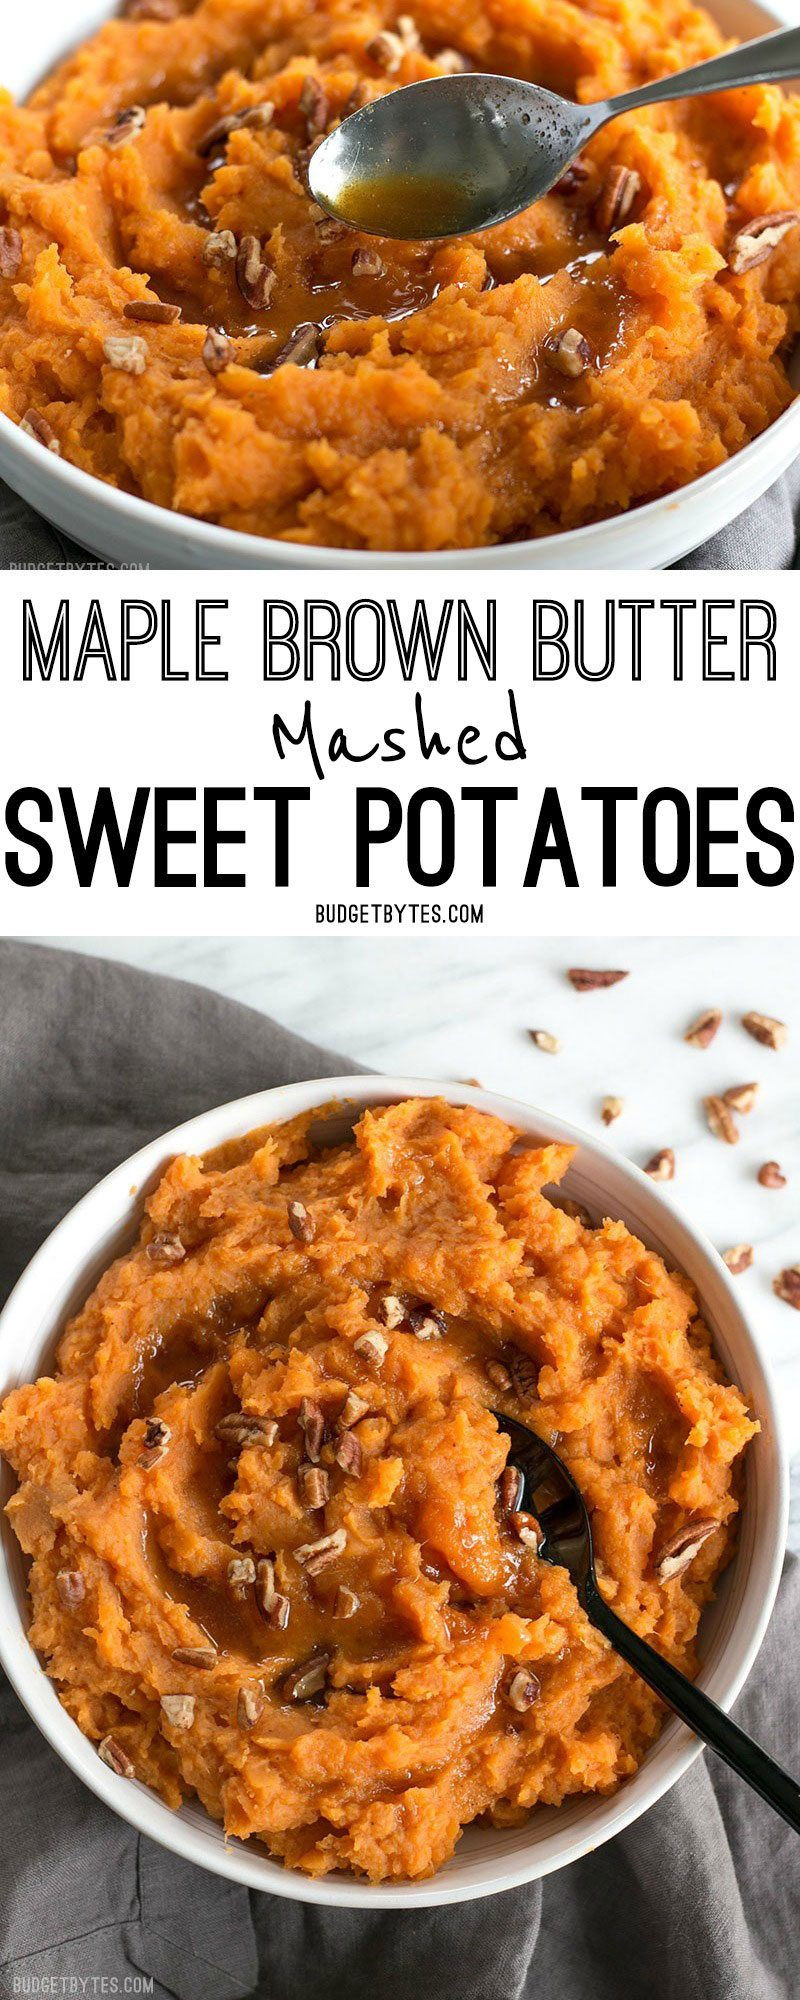 Sweet Potato Recipes For Thanksgiving
 Maple Brown Butter Mashed Sweet Potatoes